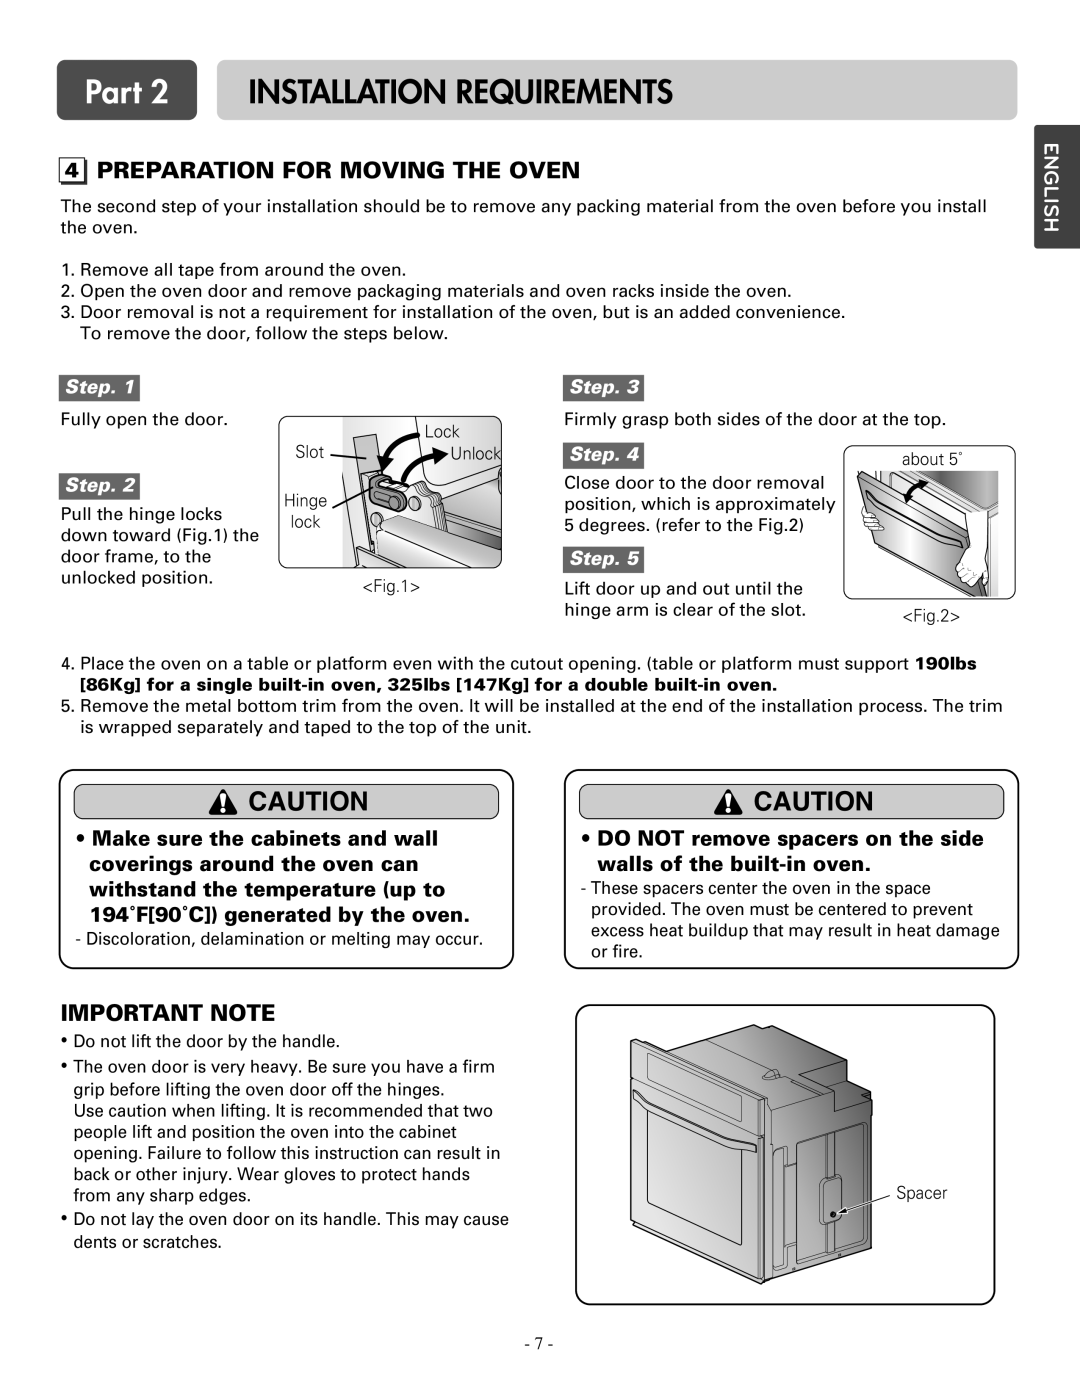 LG Electronics LSWD305ST Preparation For Moving The Oven, Part 2 INSTALLATION REQUIREMENTS, Important Note, English, Step 